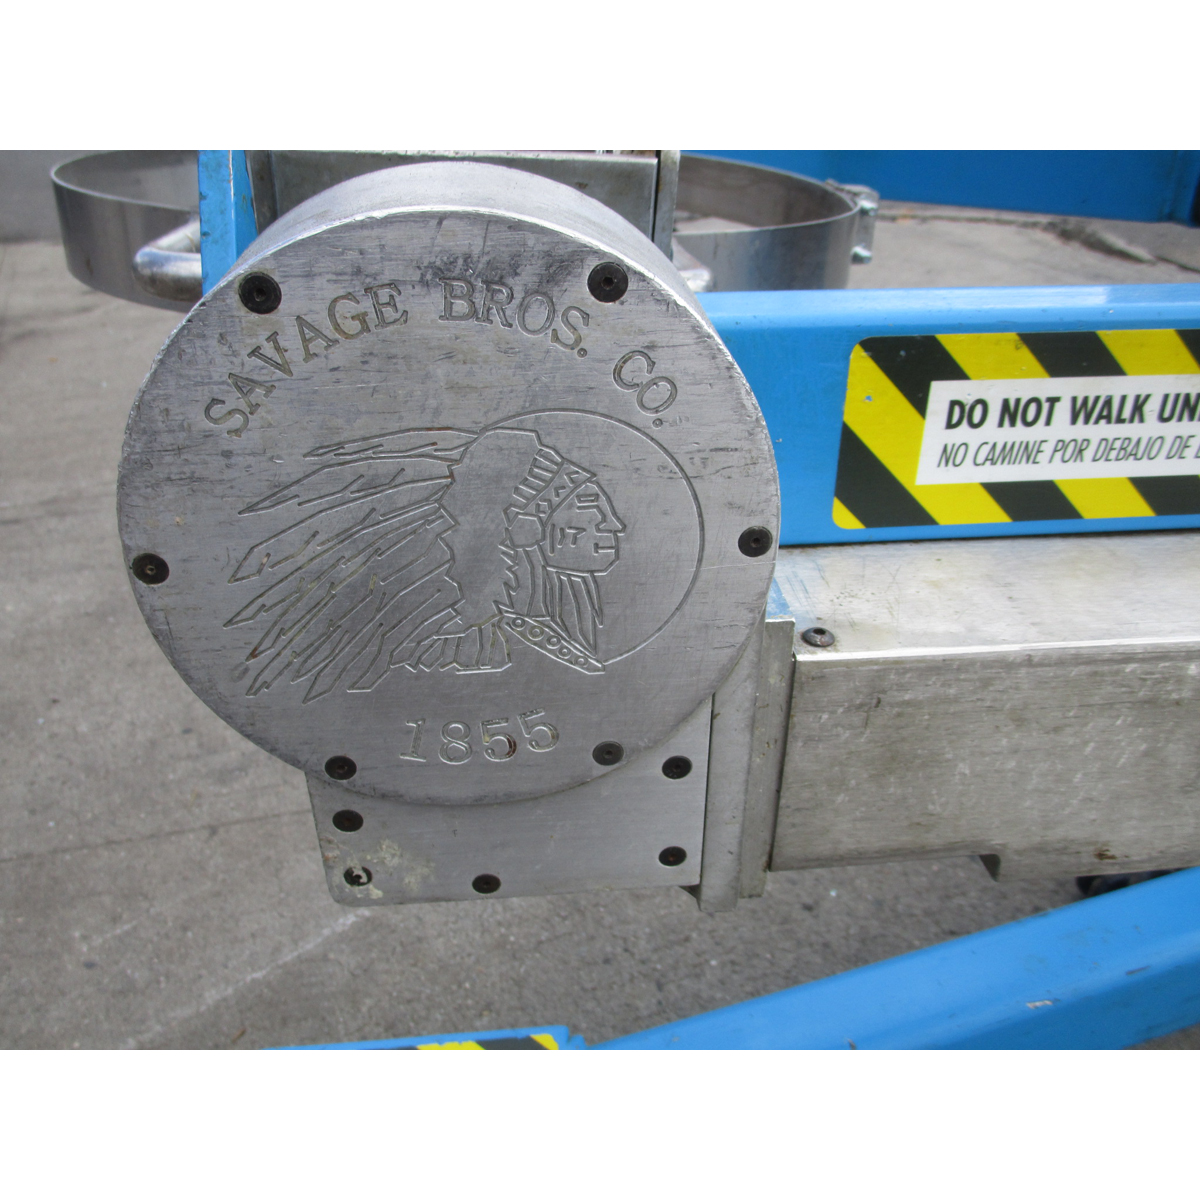 Savage Bros. 0712HT Bowl Lifter, Used Excellent Condition image 4